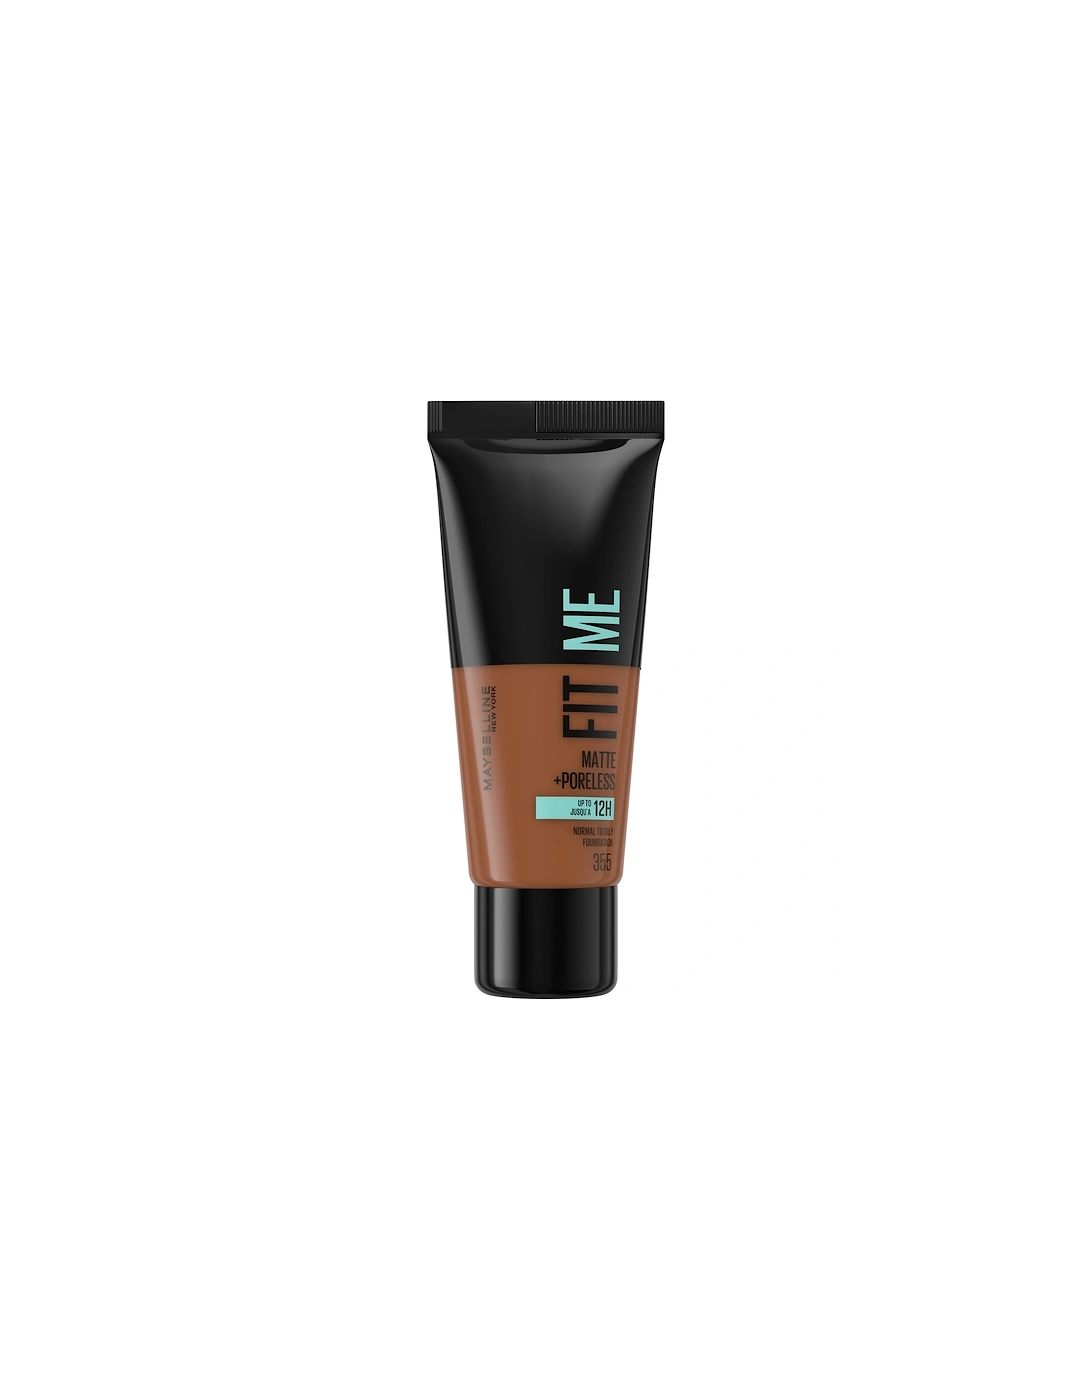 Fit Me! Matte and Poreless Foundation - 355 Pecan - - Fit Me! Matte and Poreless Foundation 30ml (Various Shades) - Foundation - Fit Me! Matte and Poreless Foundation 30ml (Various Shades) - Tina - Fit Me! Matte and Poreless Foundation 30ml (Various Shades) - Jo, 2 of 1